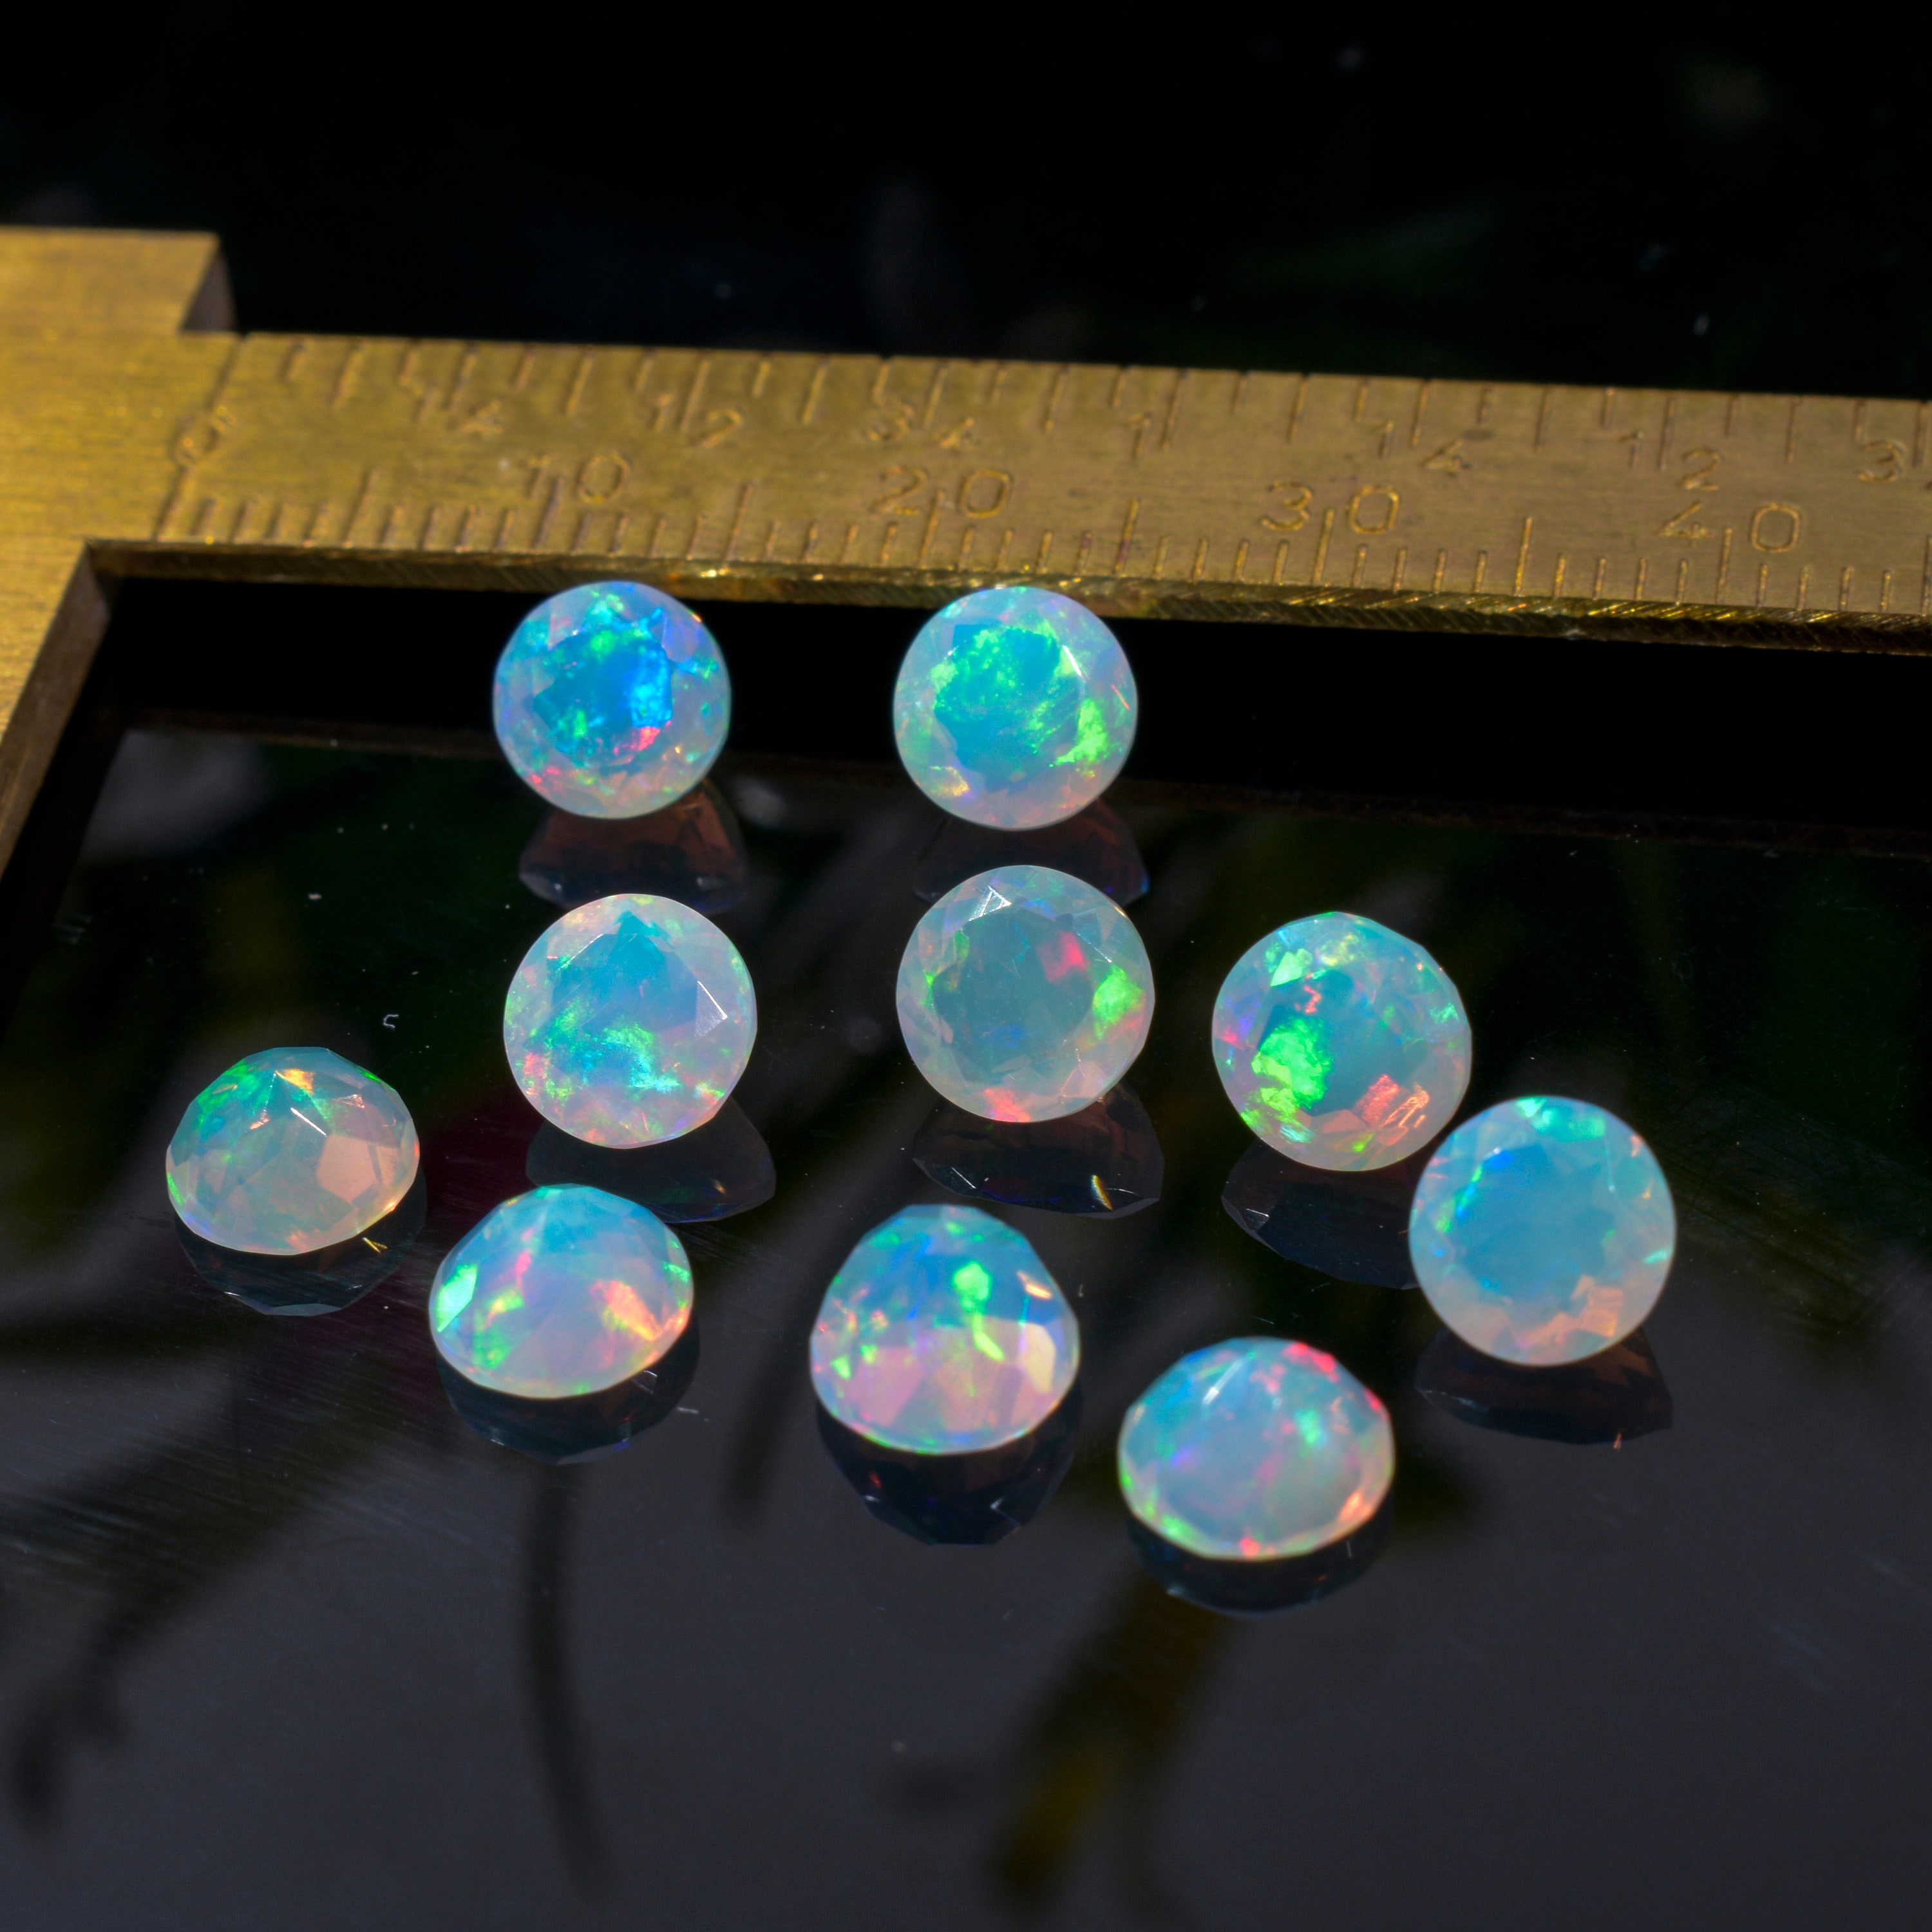 Details about   SALE! Great Lot Natural Ethiopian Opal 7x7 mm Round Faceted Cut Loose Gemstone 